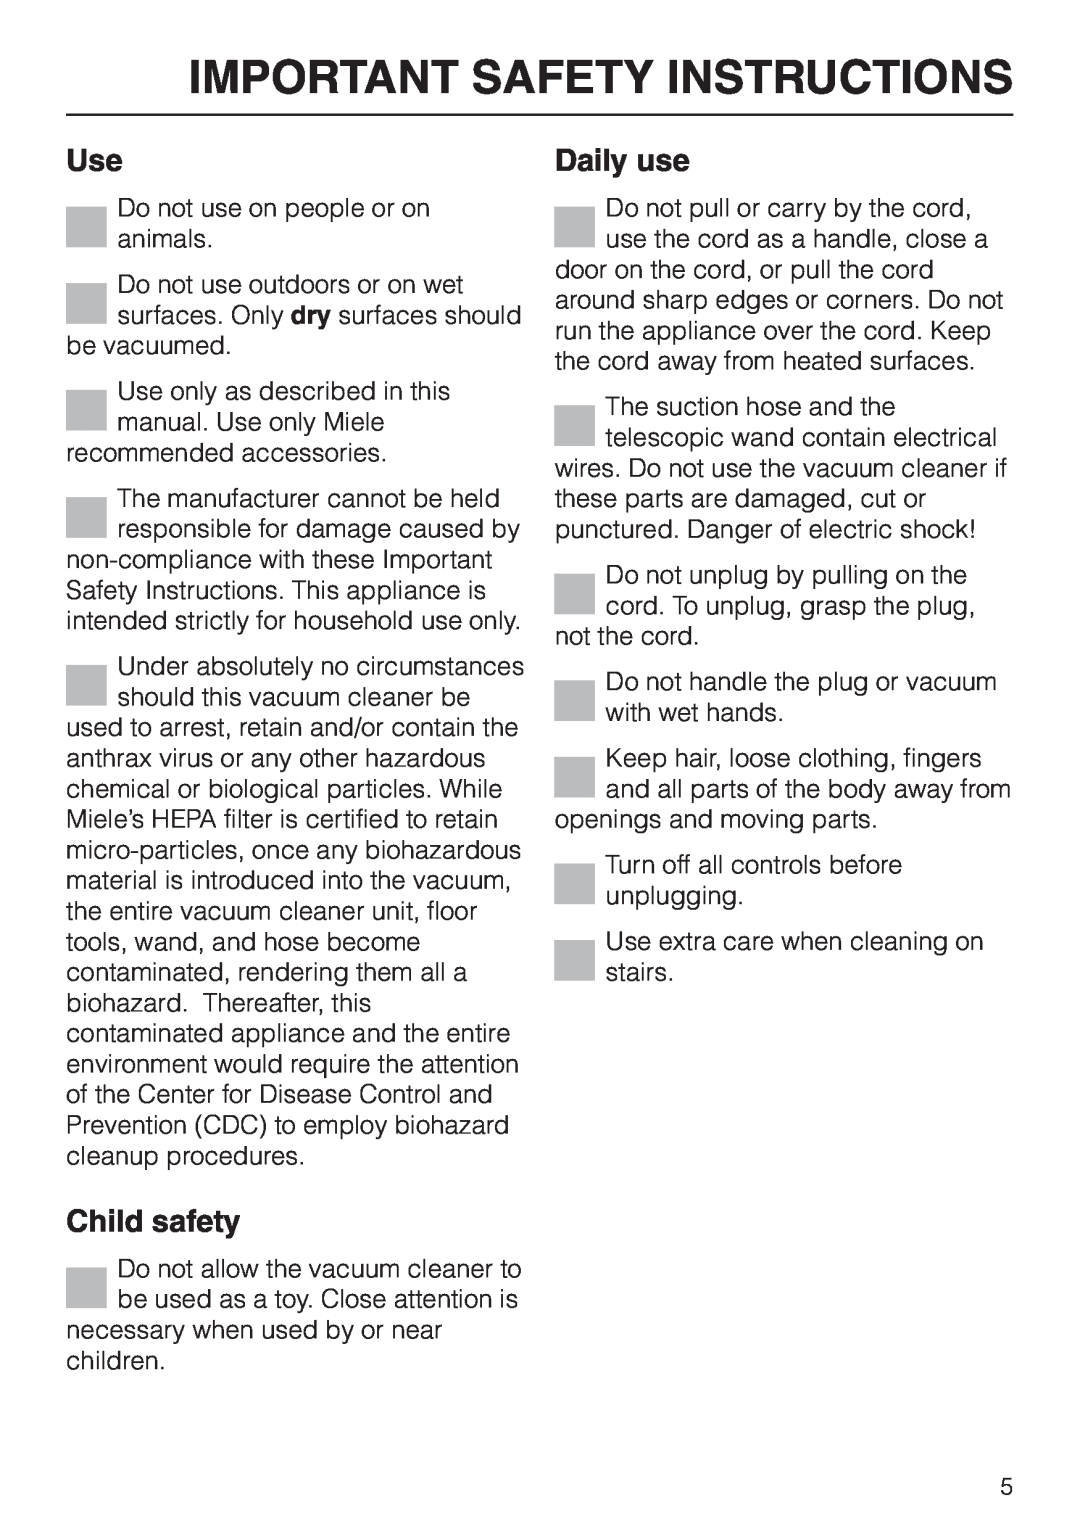 Miele S 658 manual Child safety, Daily use, Important Safety Instructions 